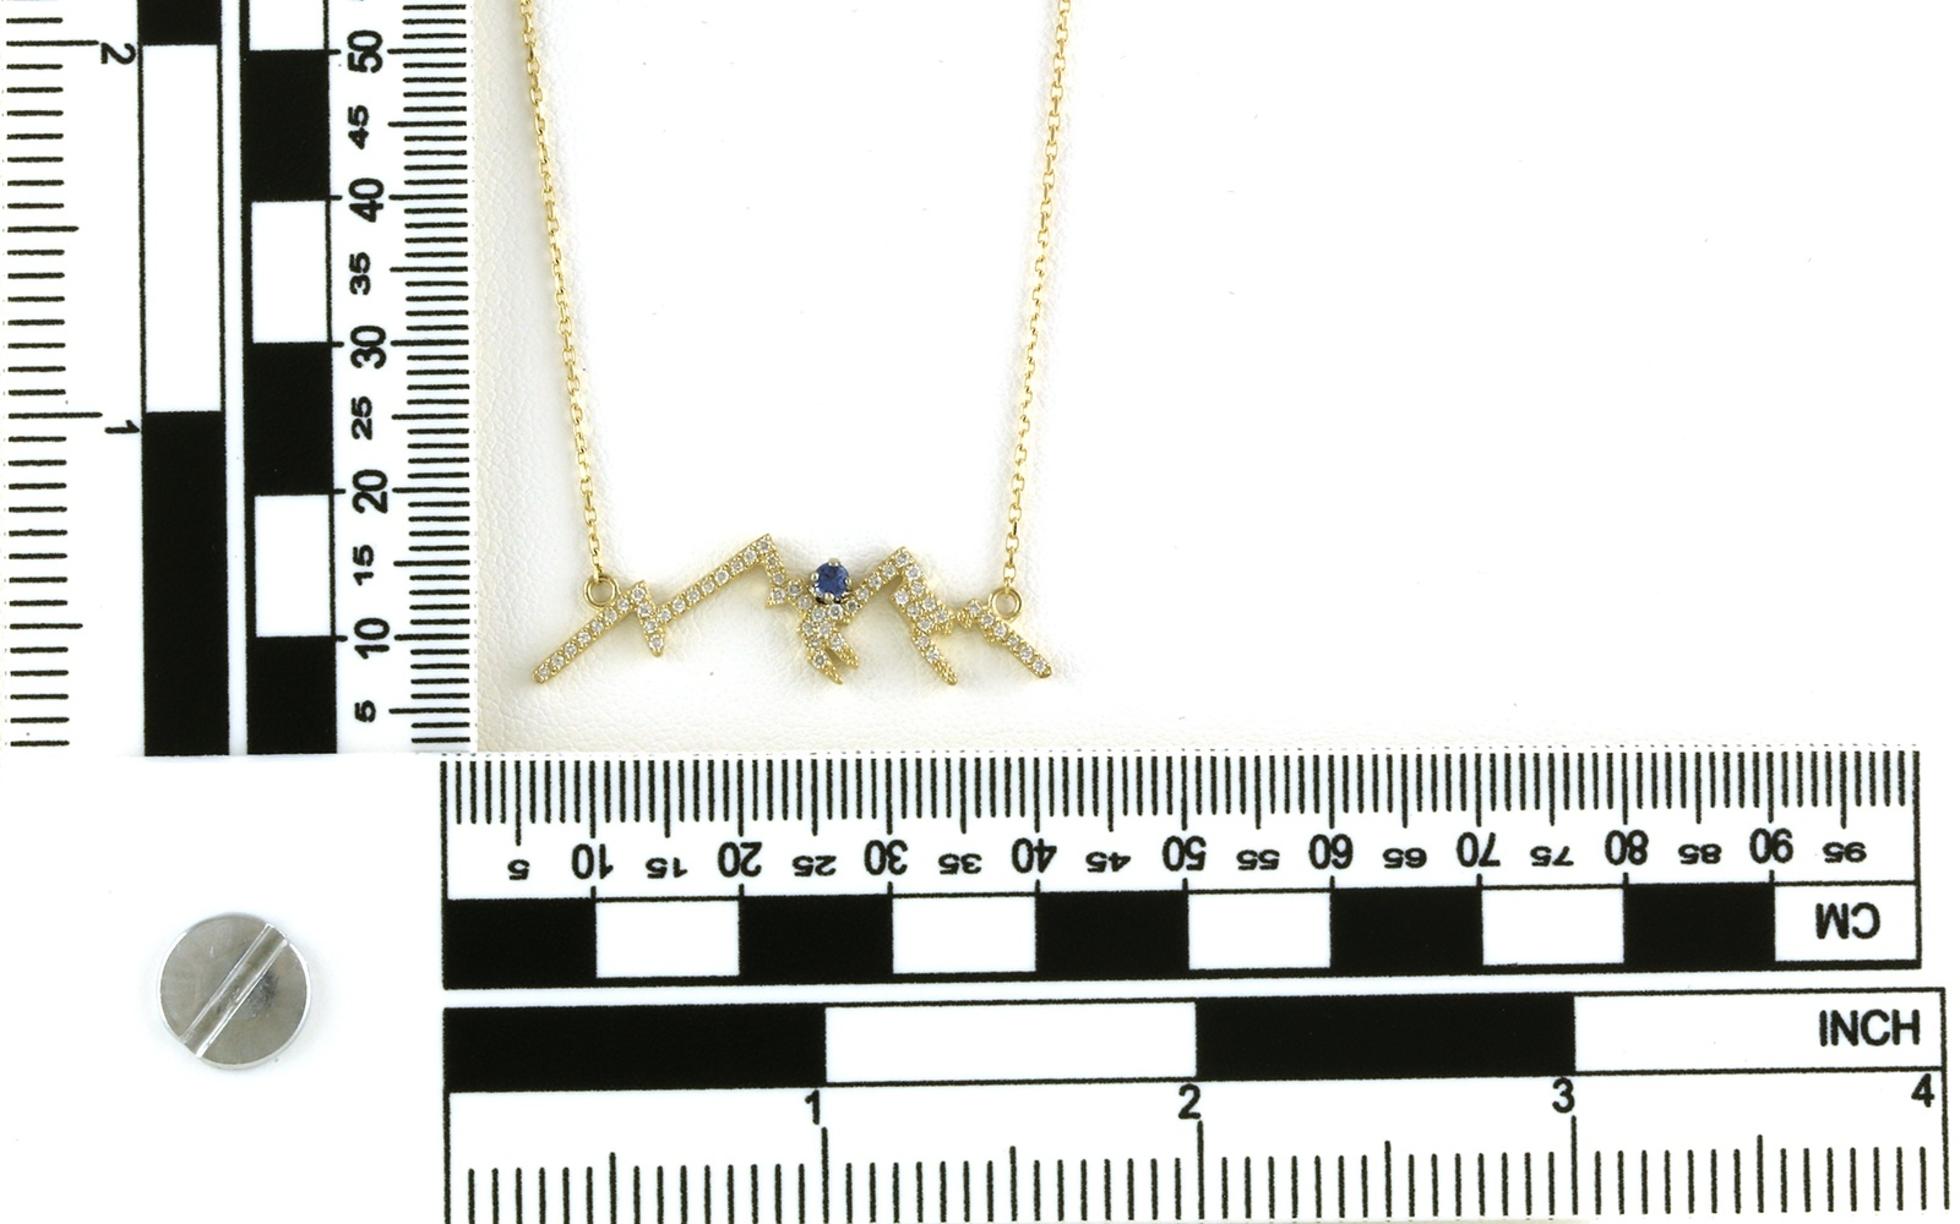  Mountain Ridgeline Montana Yogo Sapphire and Diamond Necklace in Yellow Gold (0.31cts TWT) scale